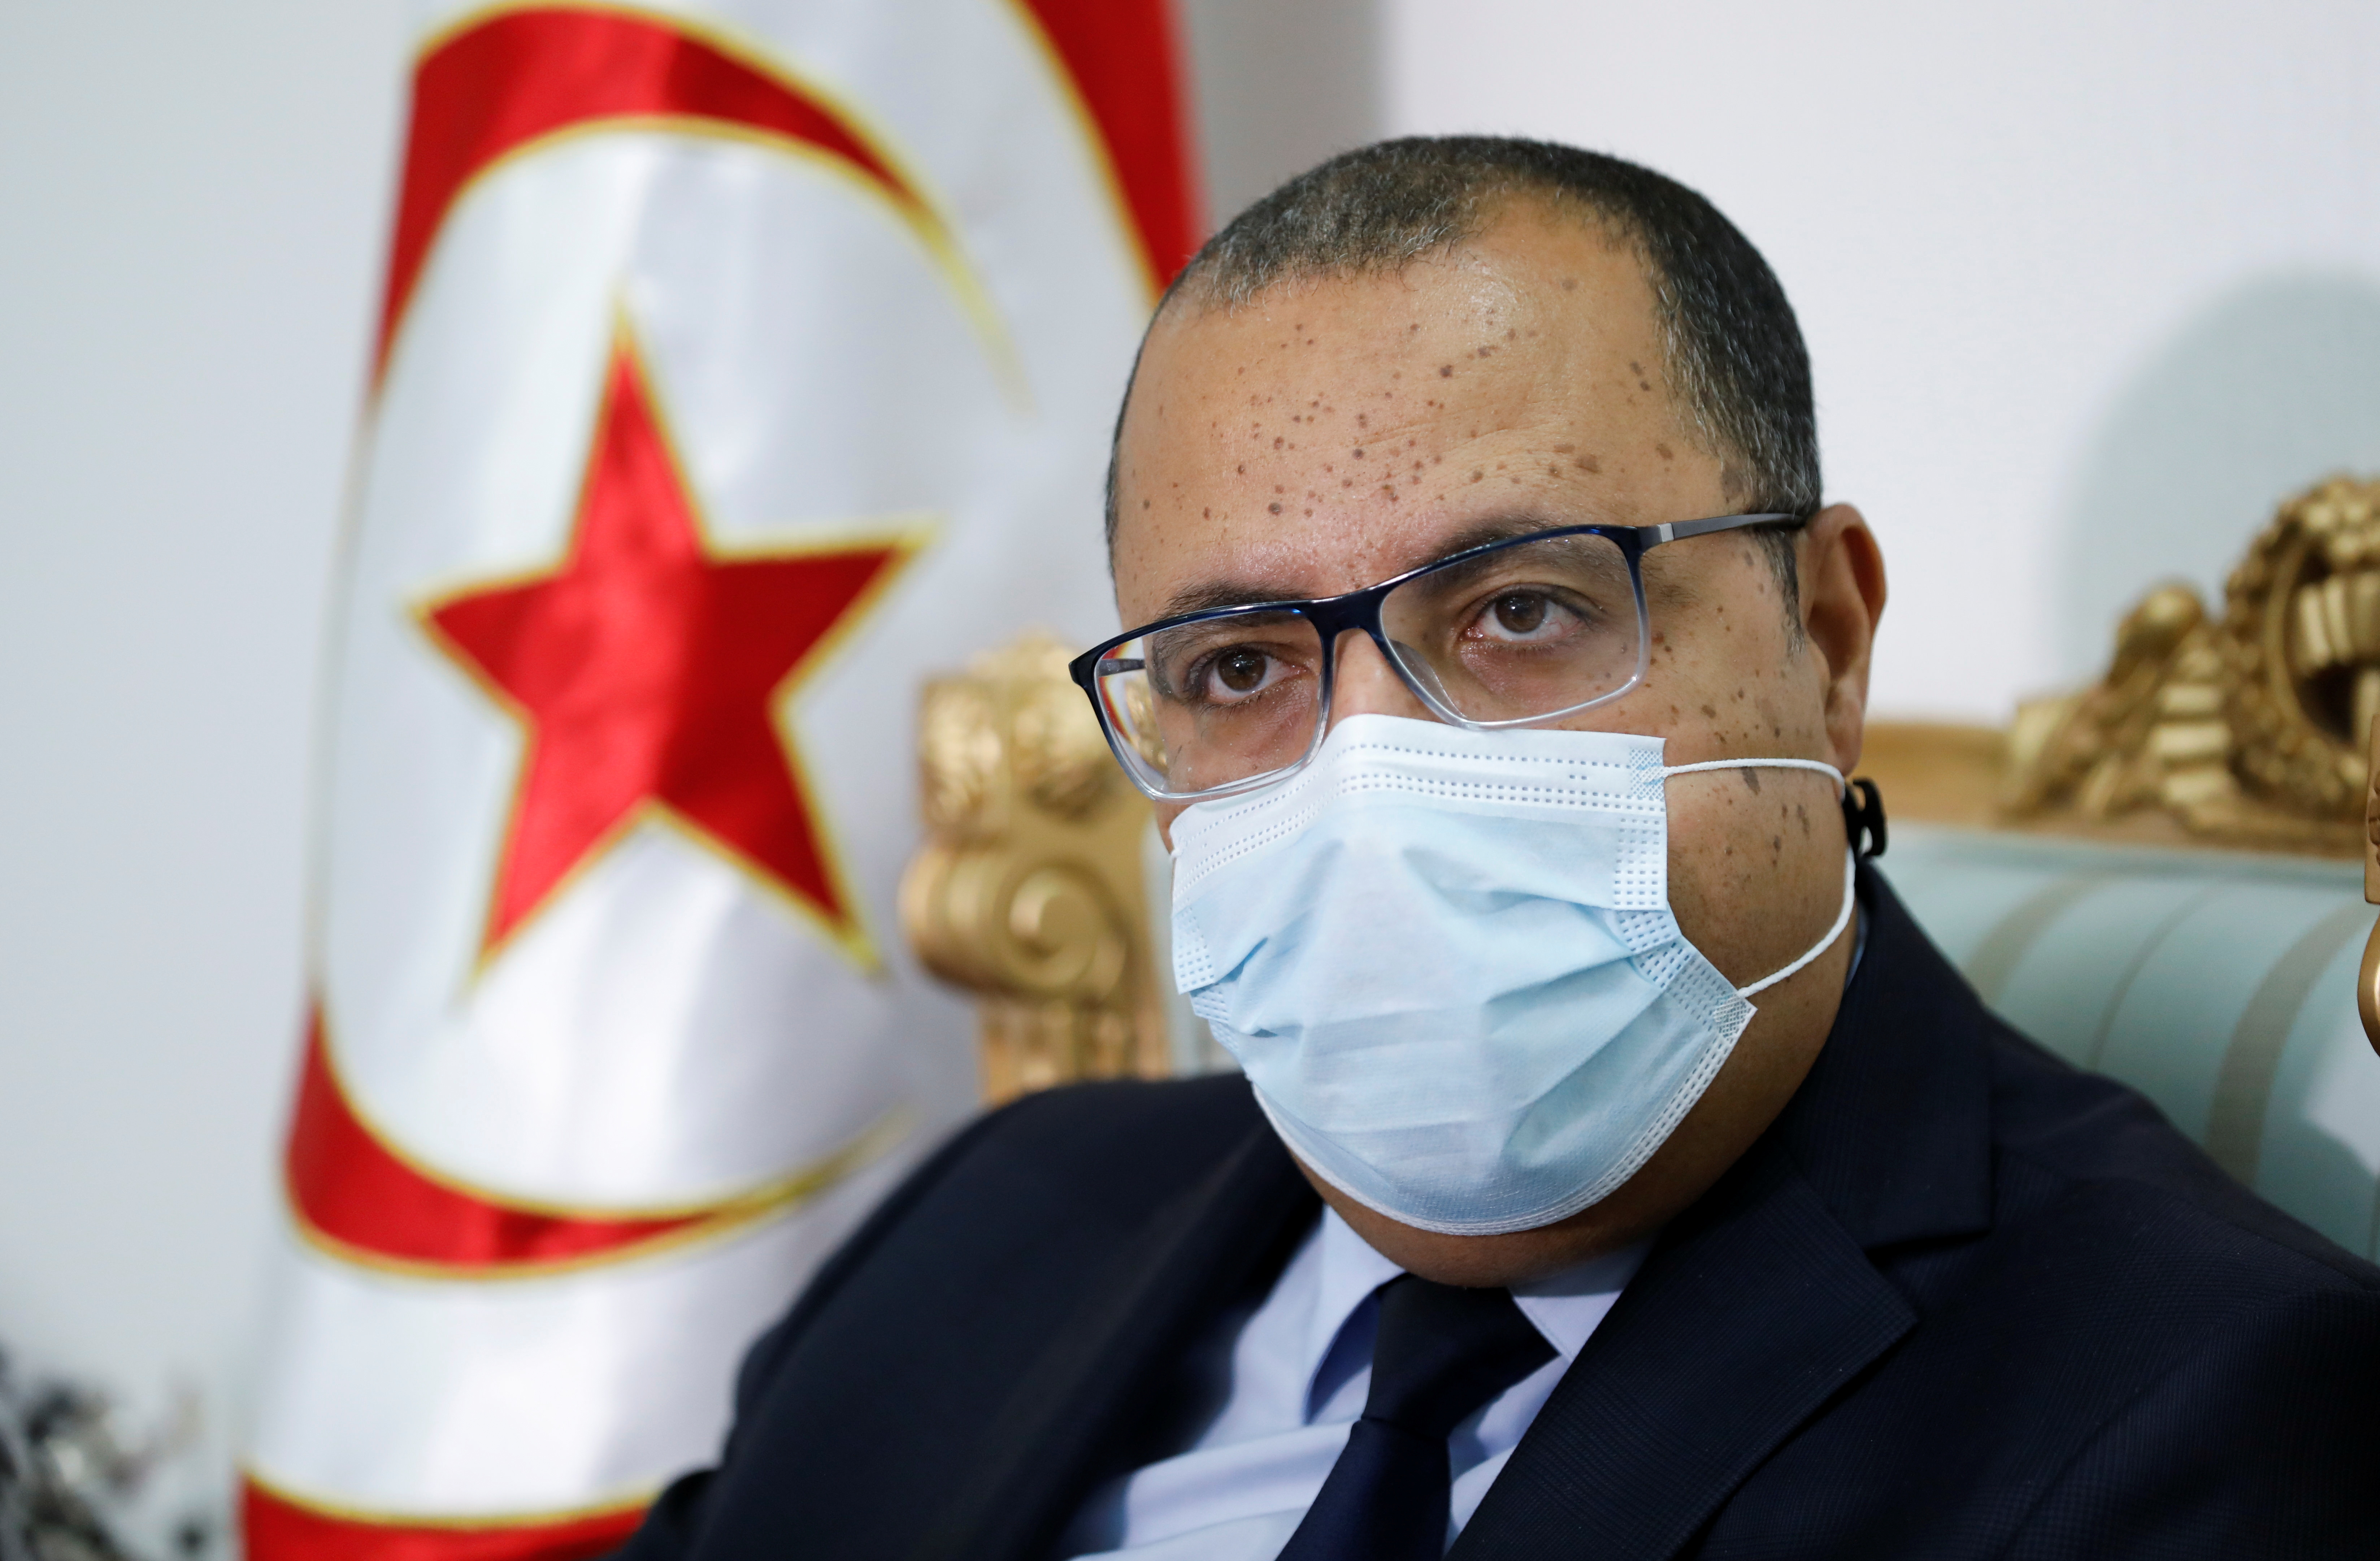 Tunisian Prime Minister Hichem Mechichi attends an interview with Reuters in Tunis, Tunisia April 30, 2021. REUTERS/Zoubeir Souissi